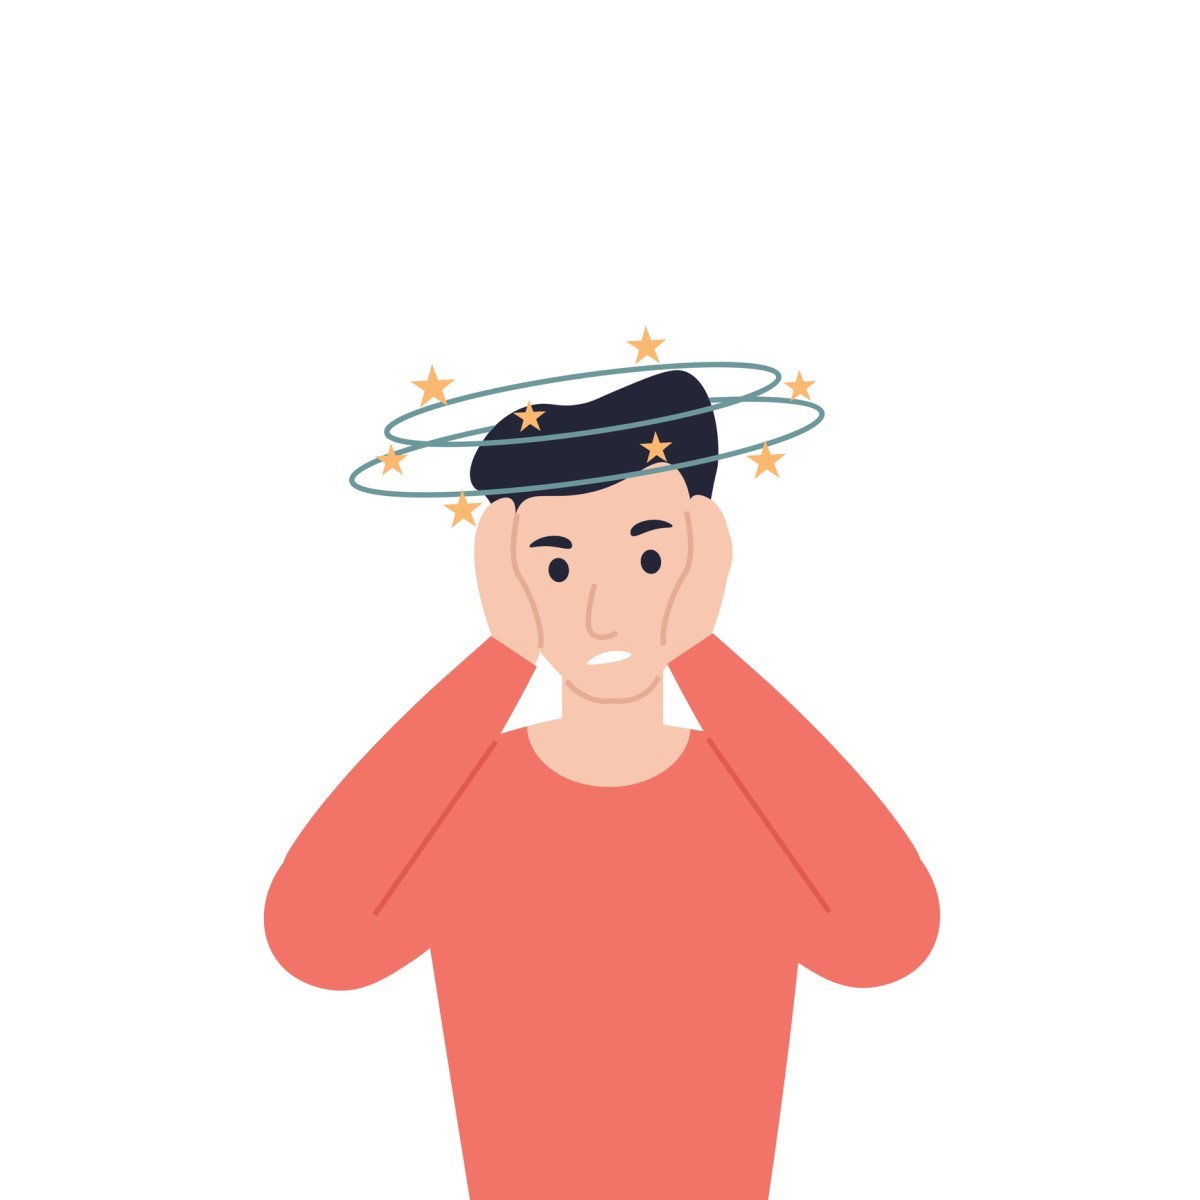 Dizziness can be treated by ENT specialists, but need to be diagnosed quickly.